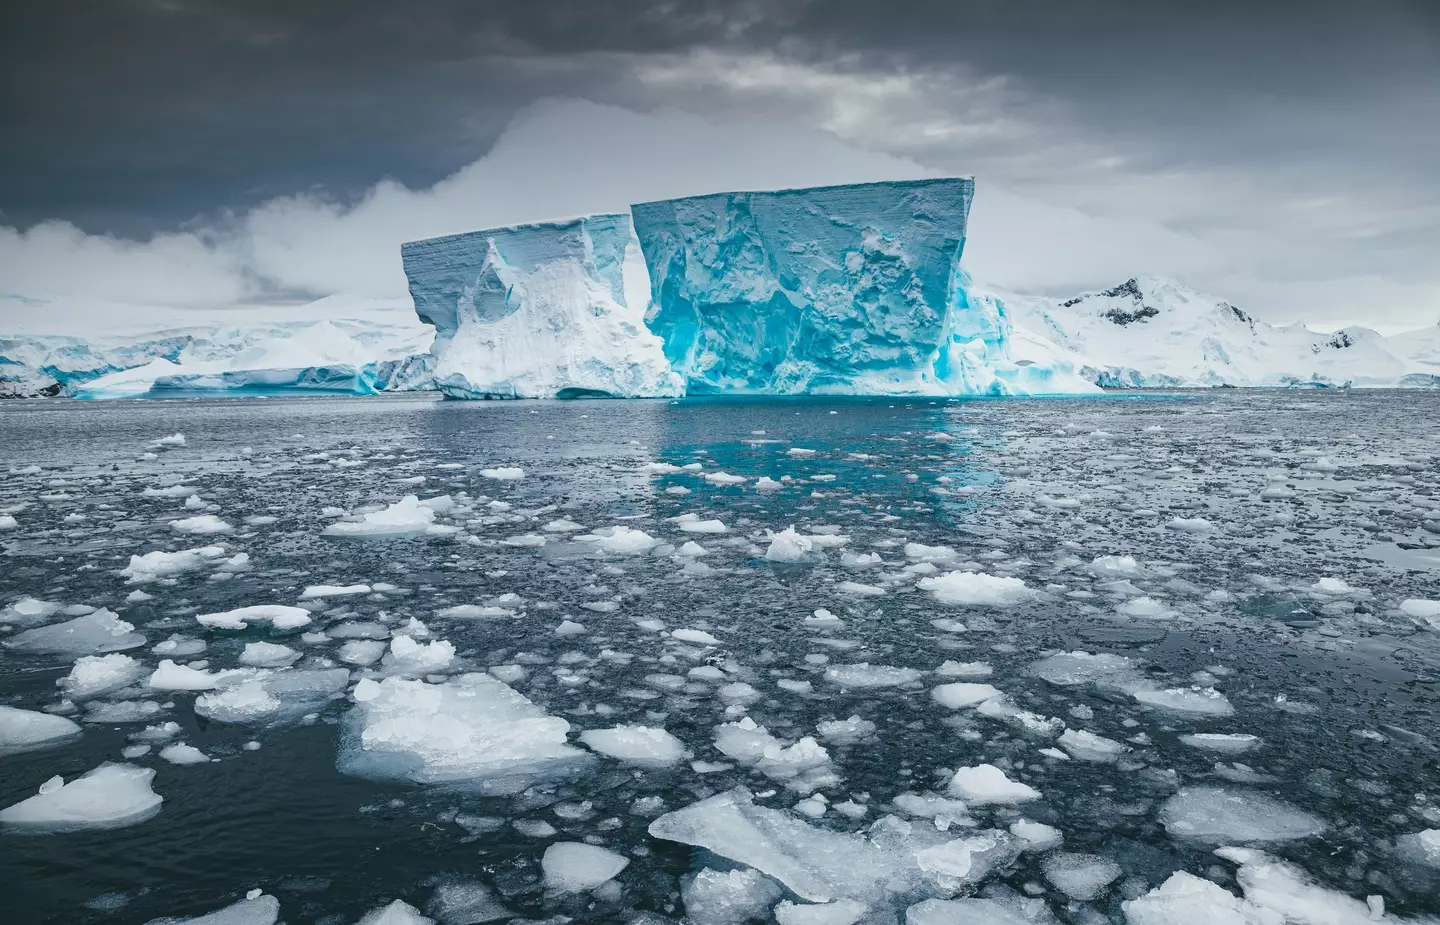 There are fears that the faster vortex will strip the Antarctic of ice even faster.